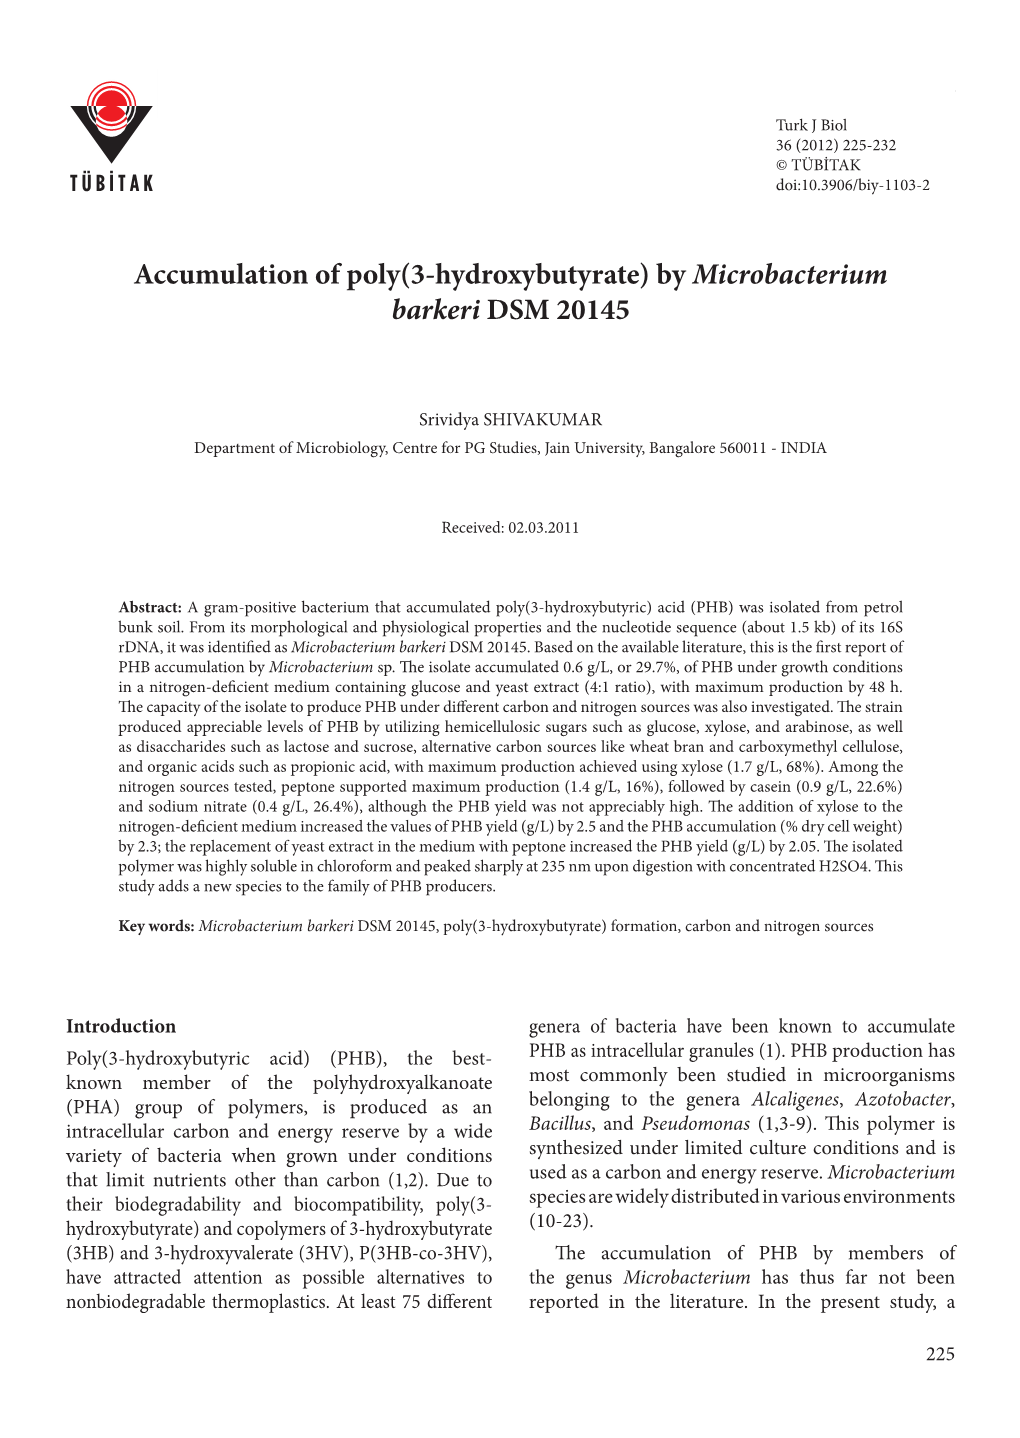 Accumulation of Poly(3-Hydroxybutyrate) by Microbacterium Barkeri DSM 20145